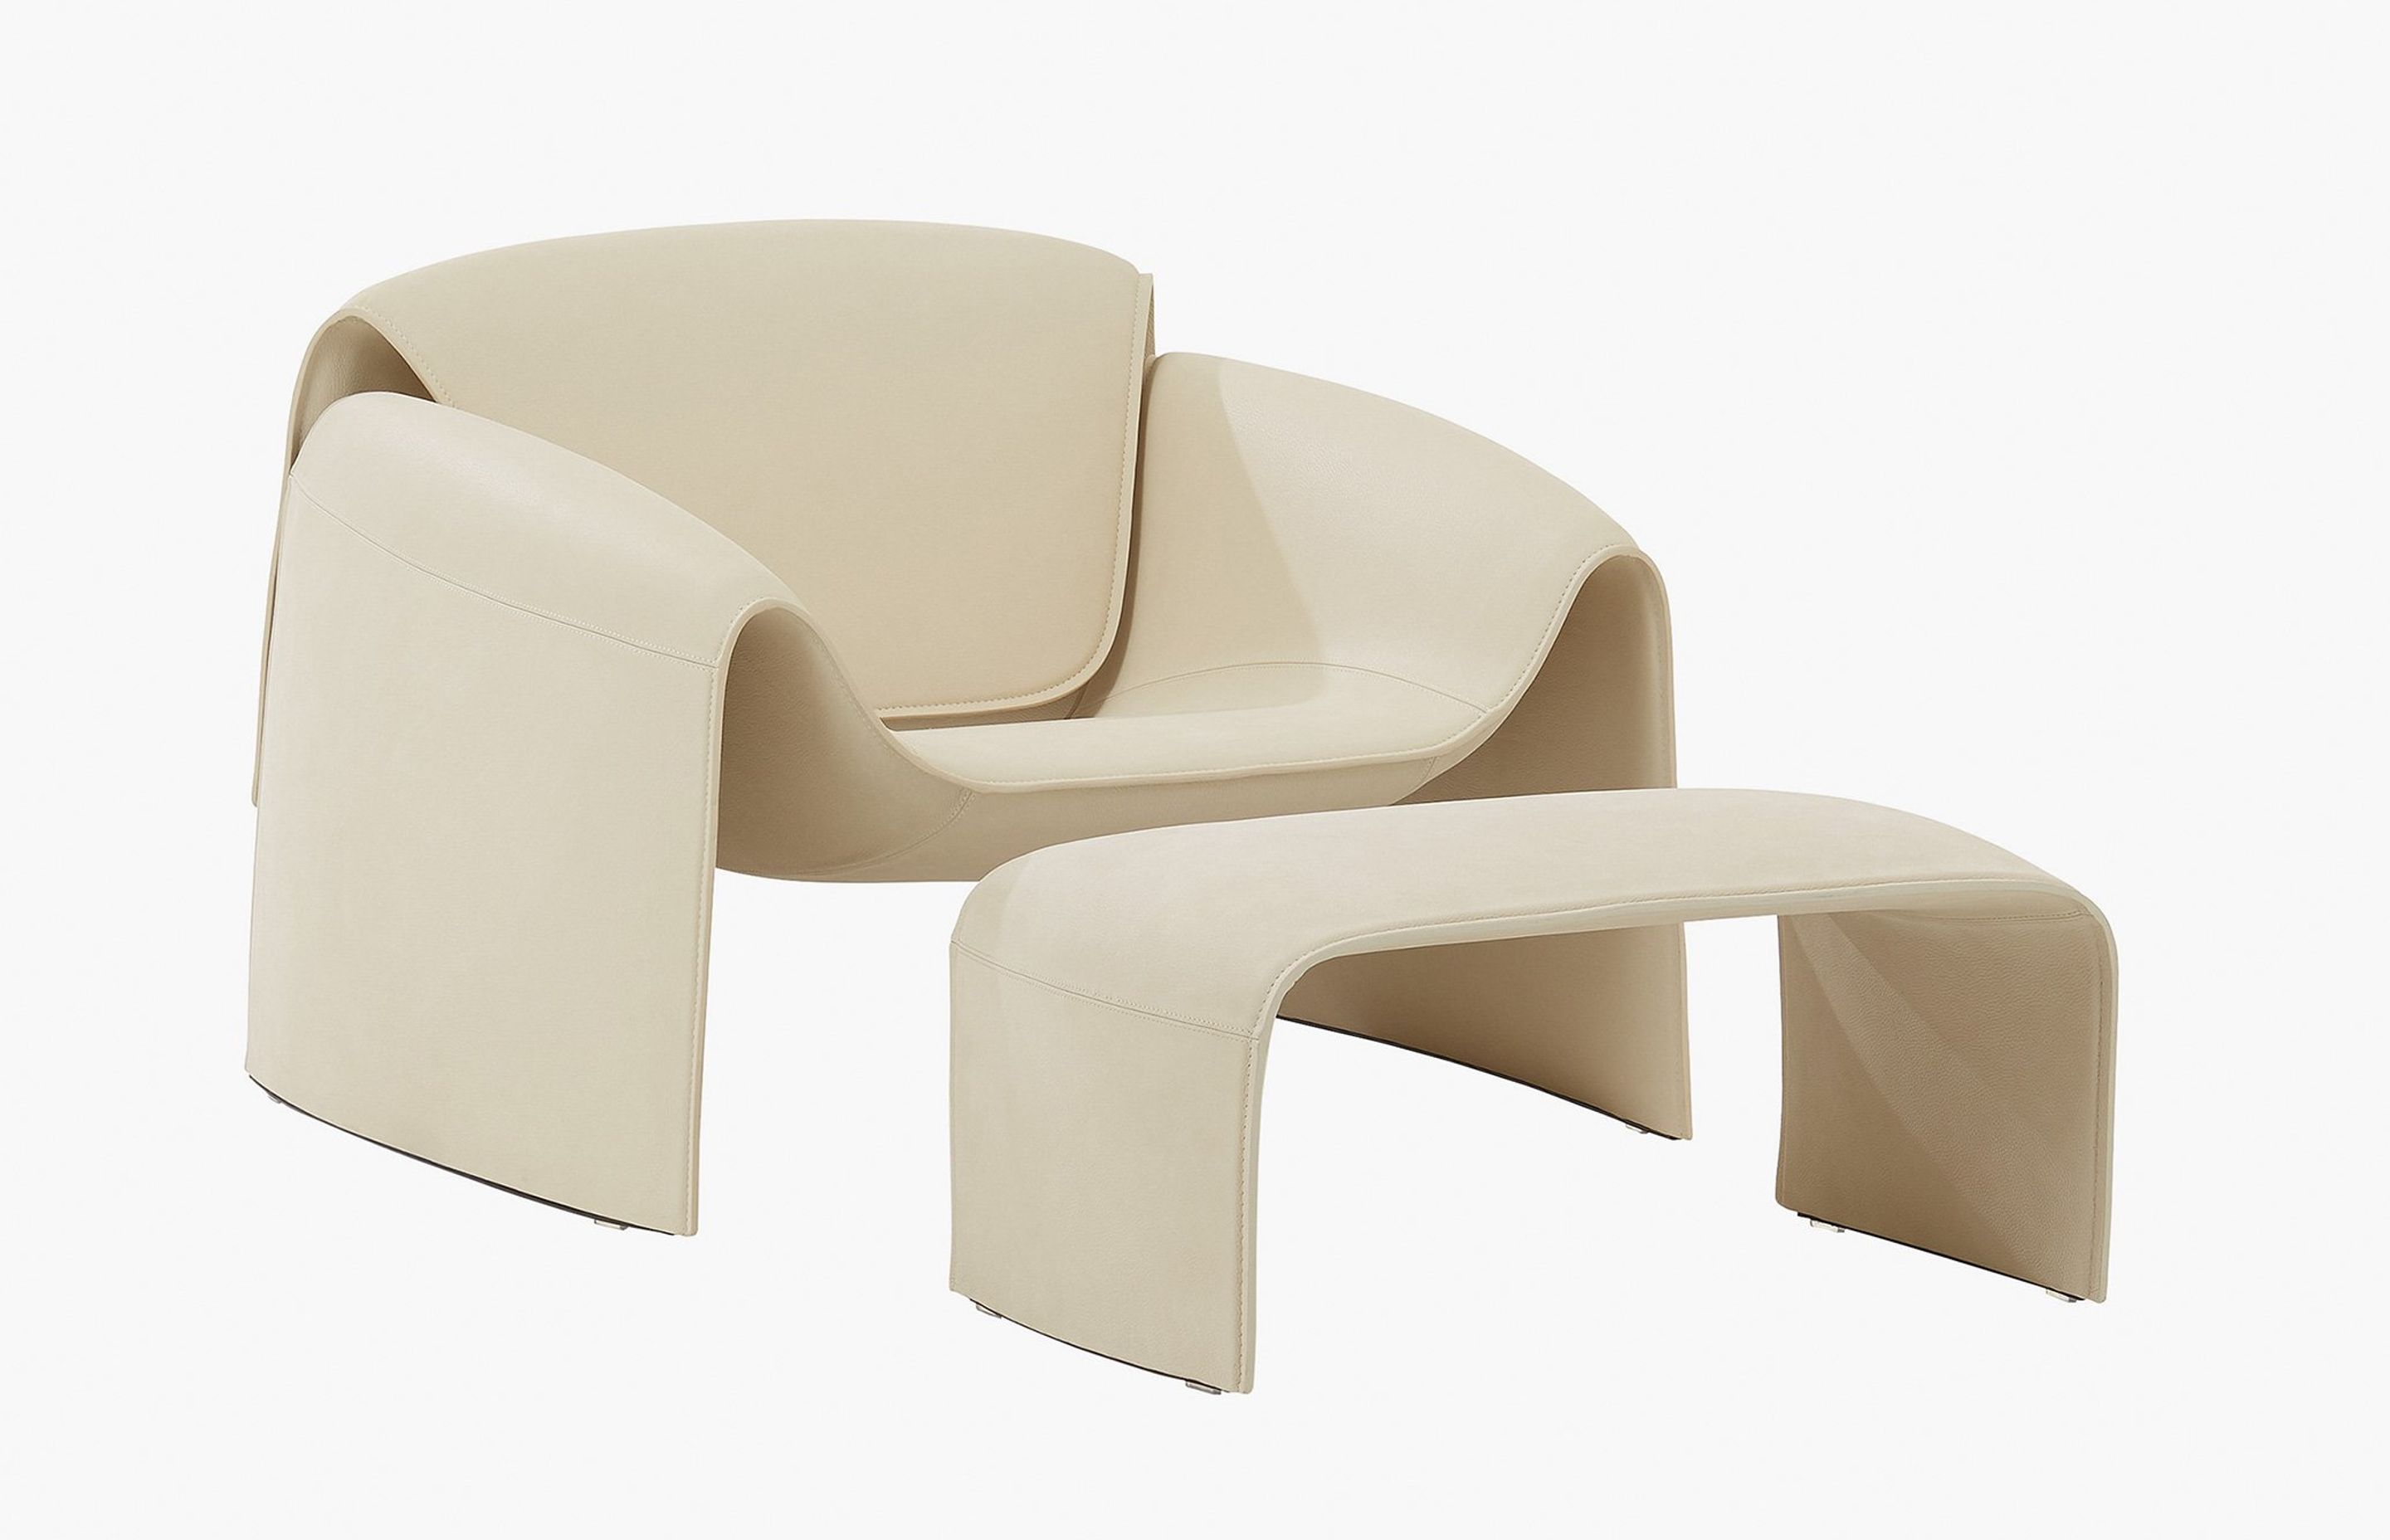 Le Club Armchair and Pouf